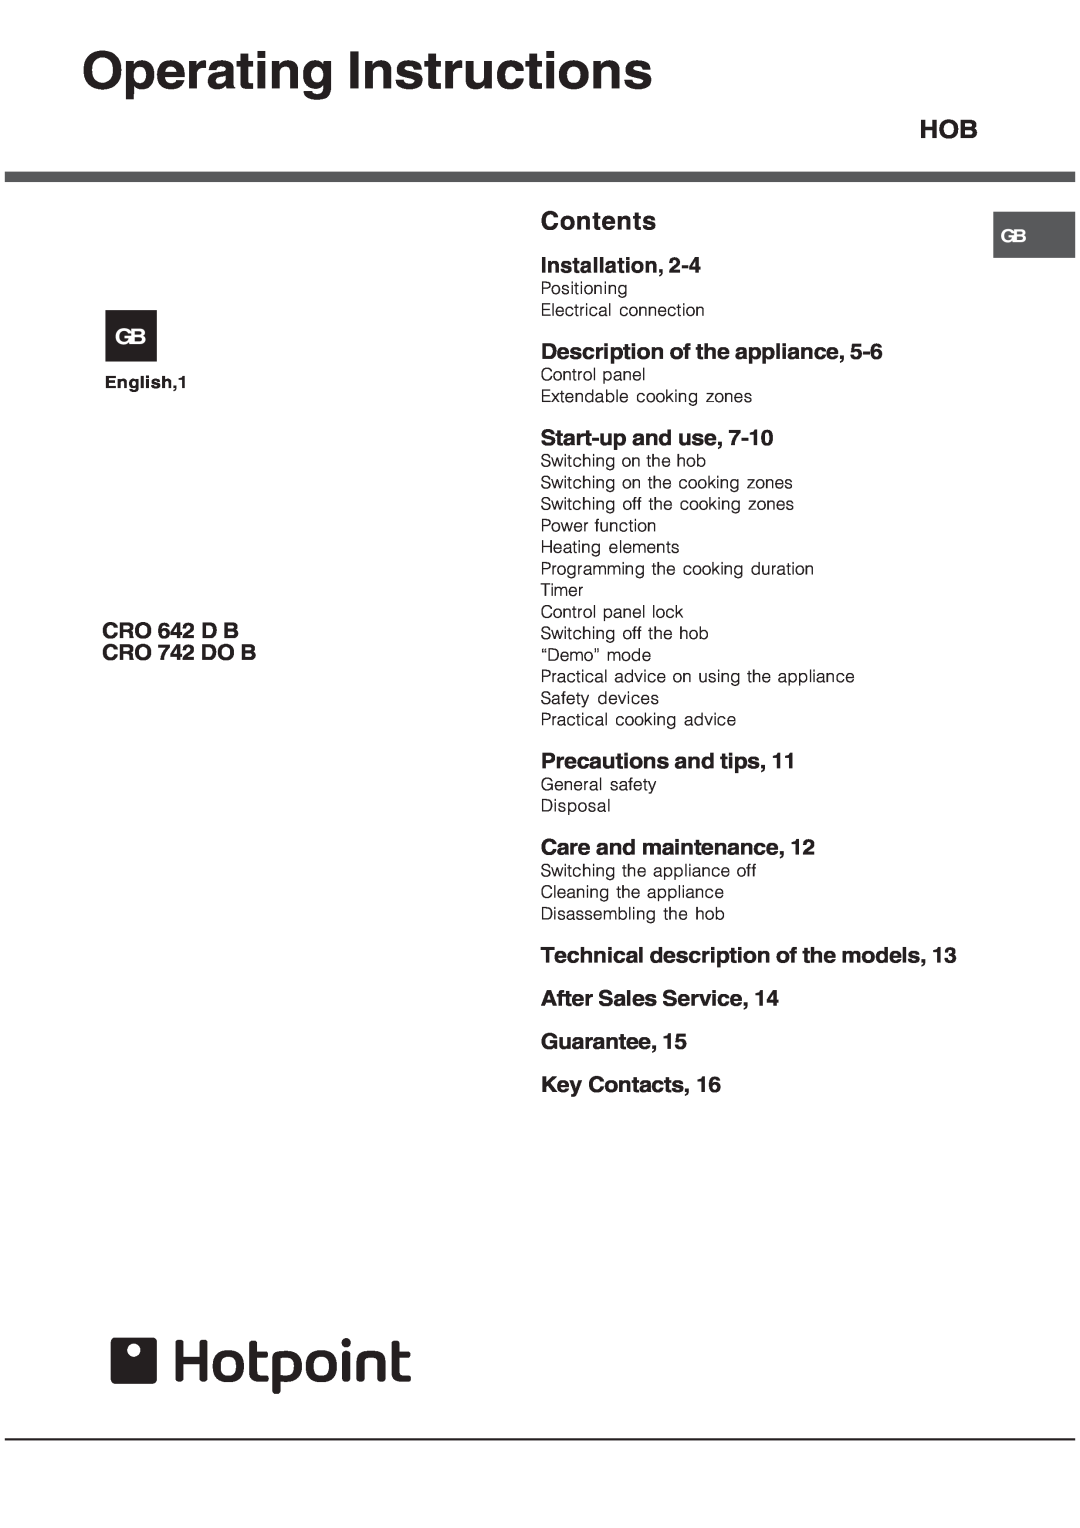 Hotpoint CRO 642 D B operating instructions Operating Instructions, Installation, Description of the appliance, Contents 